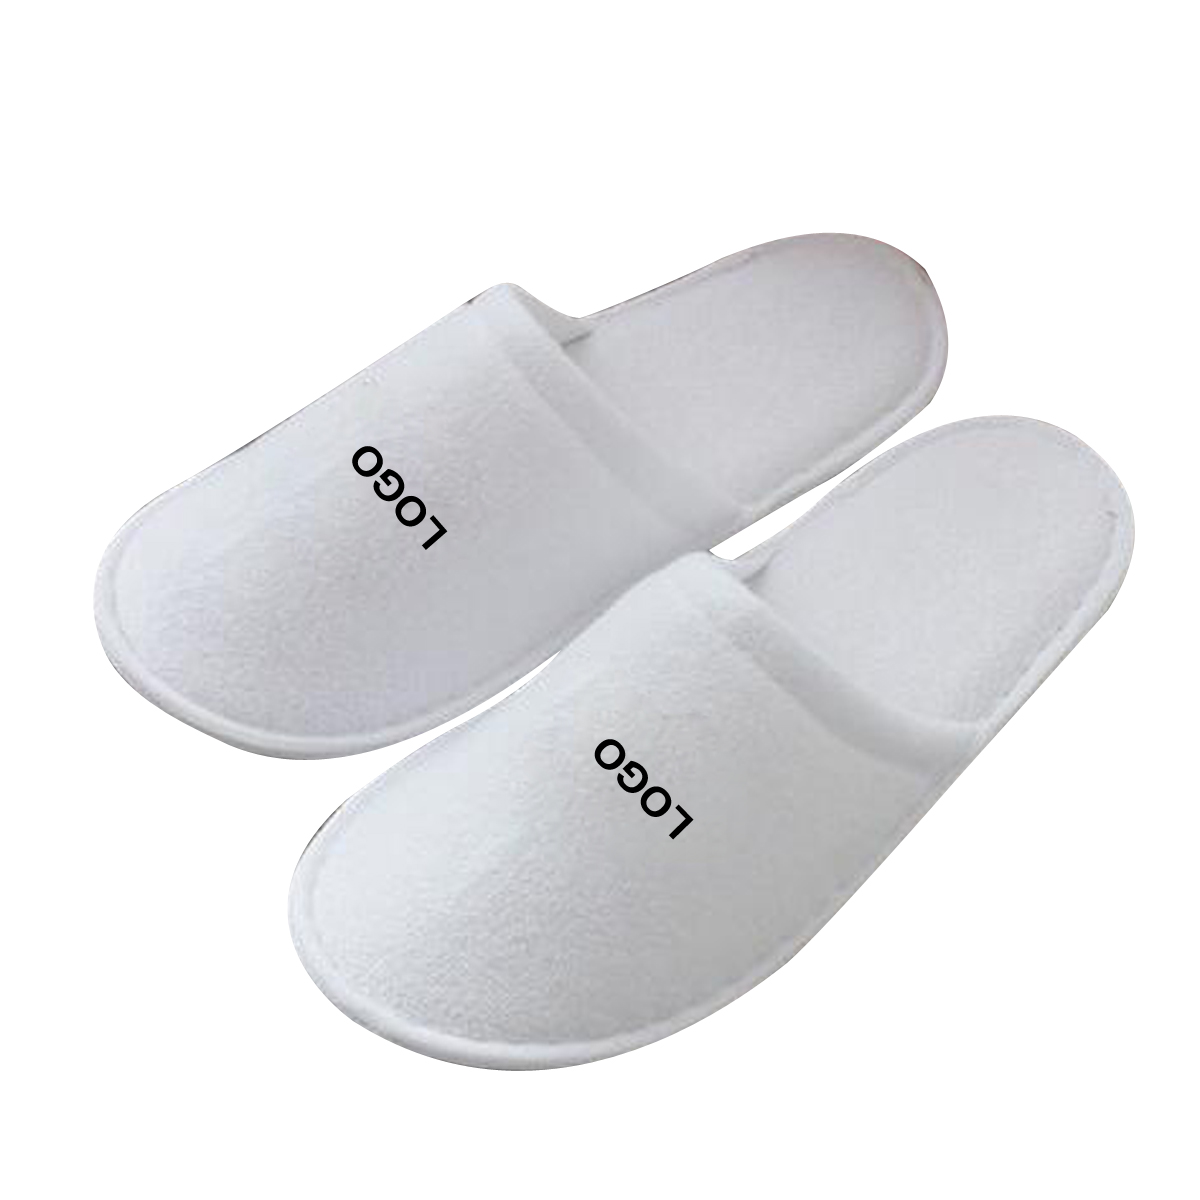 GL-JAH1025 Disposable Hotel Slippers